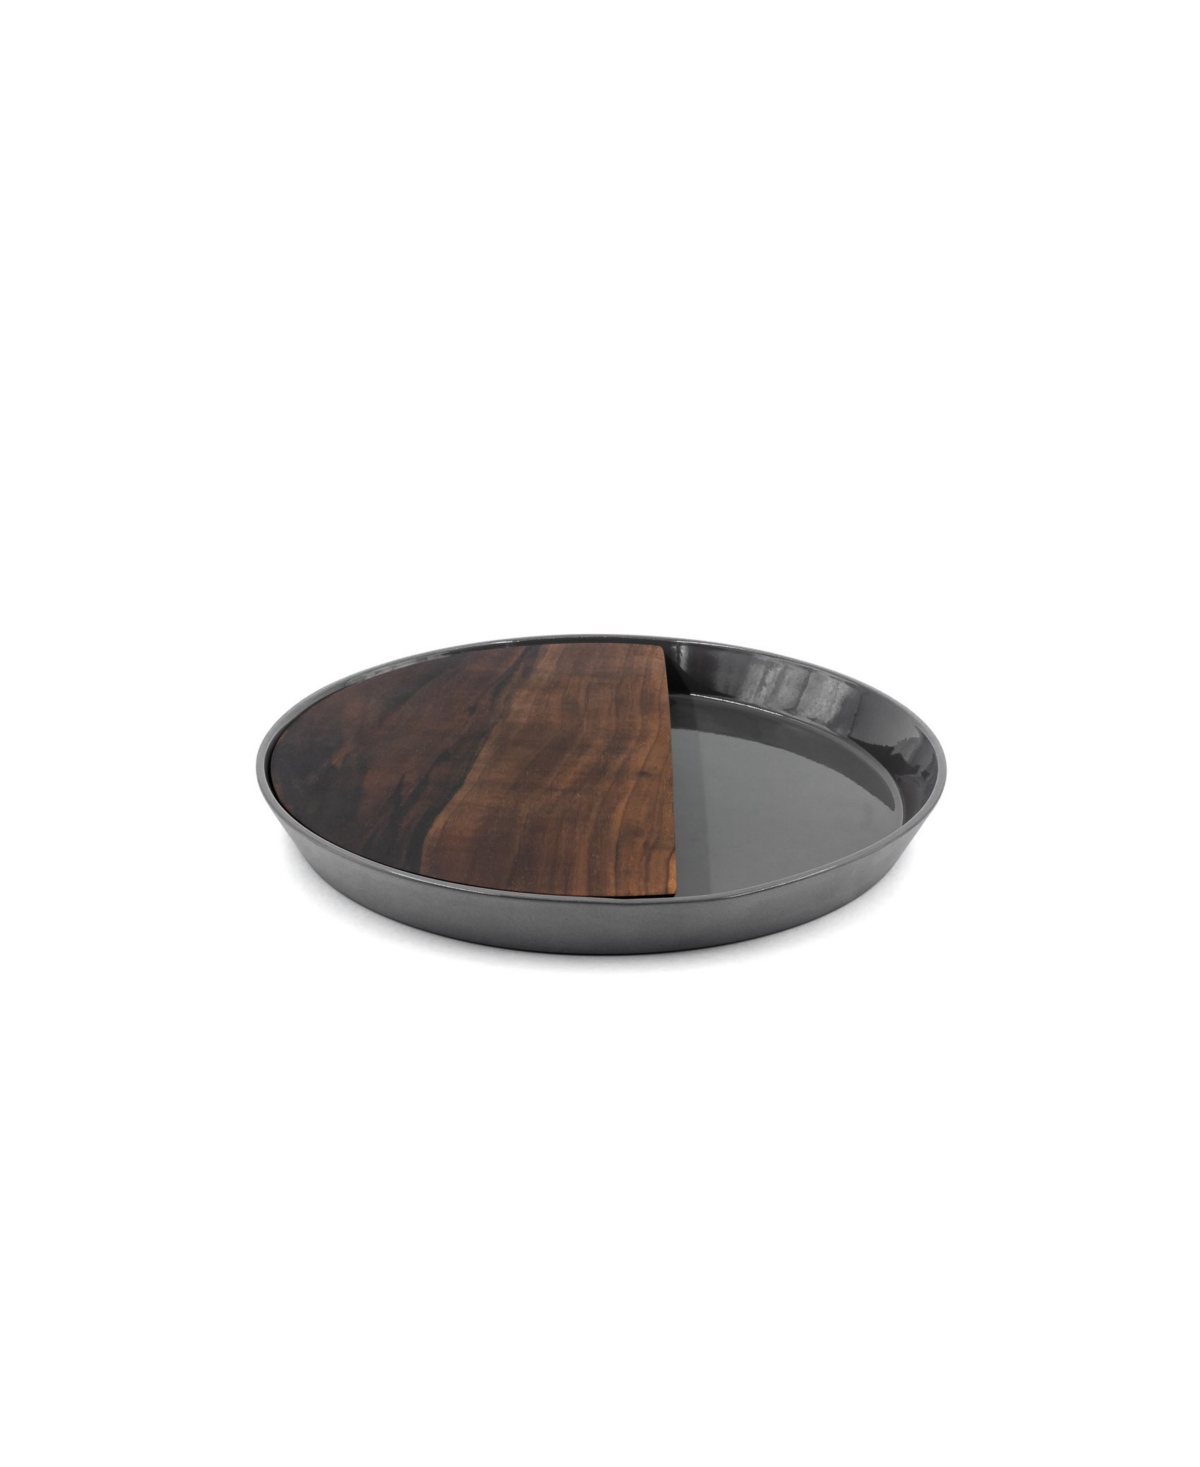 Bomshbee Eclipse Round Serving Platter with Wood Board